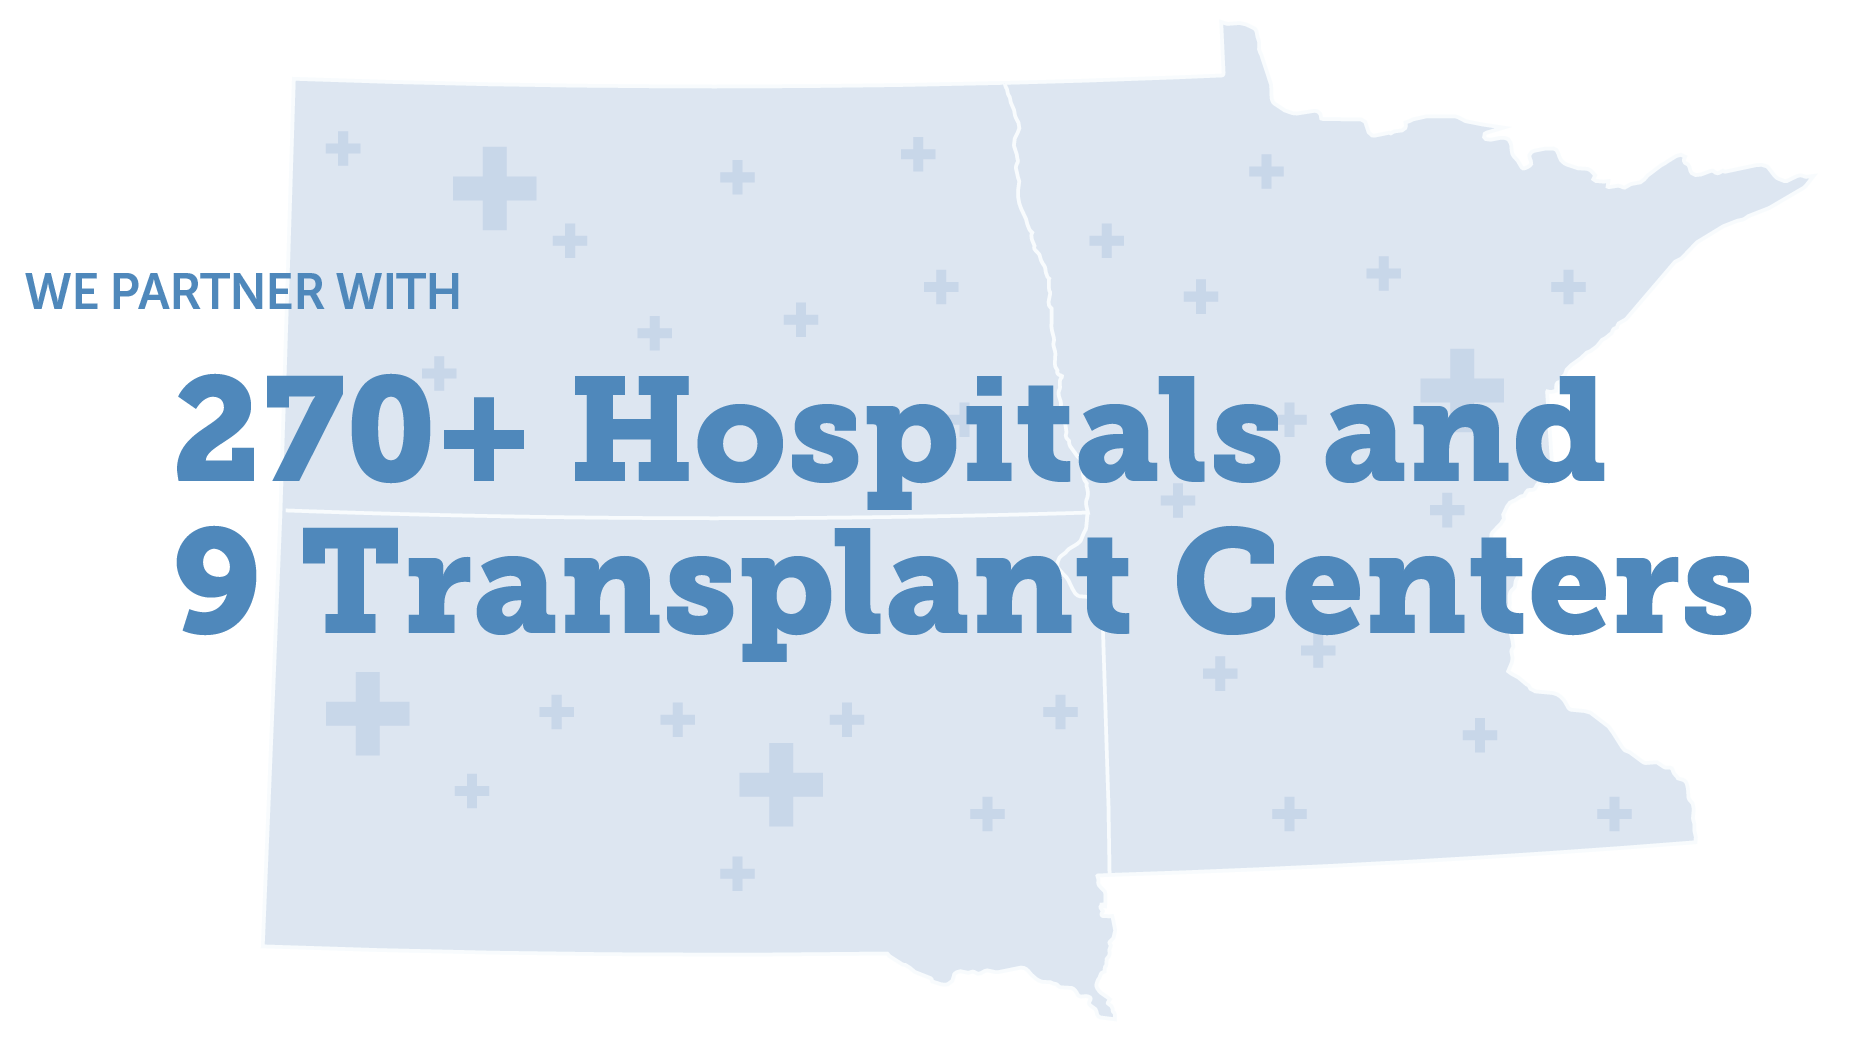 We partnered with more than 270 hospitals and 9 transplant centers in 2018.